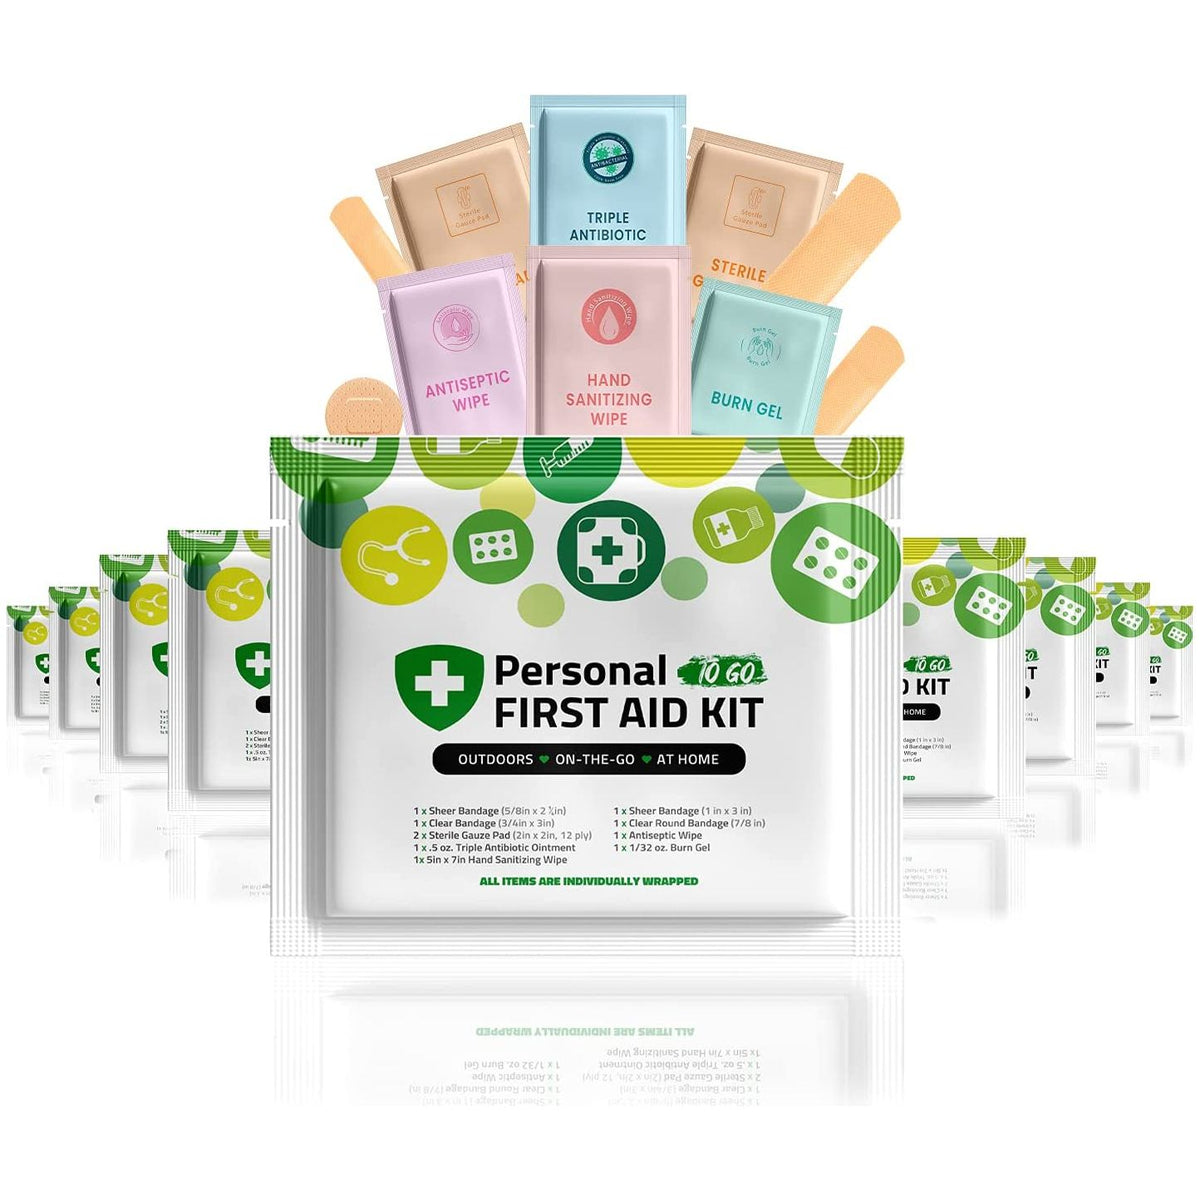 Portable Travel Size First Aid Kit - 10 Pack | Perfect for Home, Office, Car, School, Business, Travel, Hiking, Hunting, and Outdoors | Individually Wrapped First Aid Products (Green) by Skincareheaven